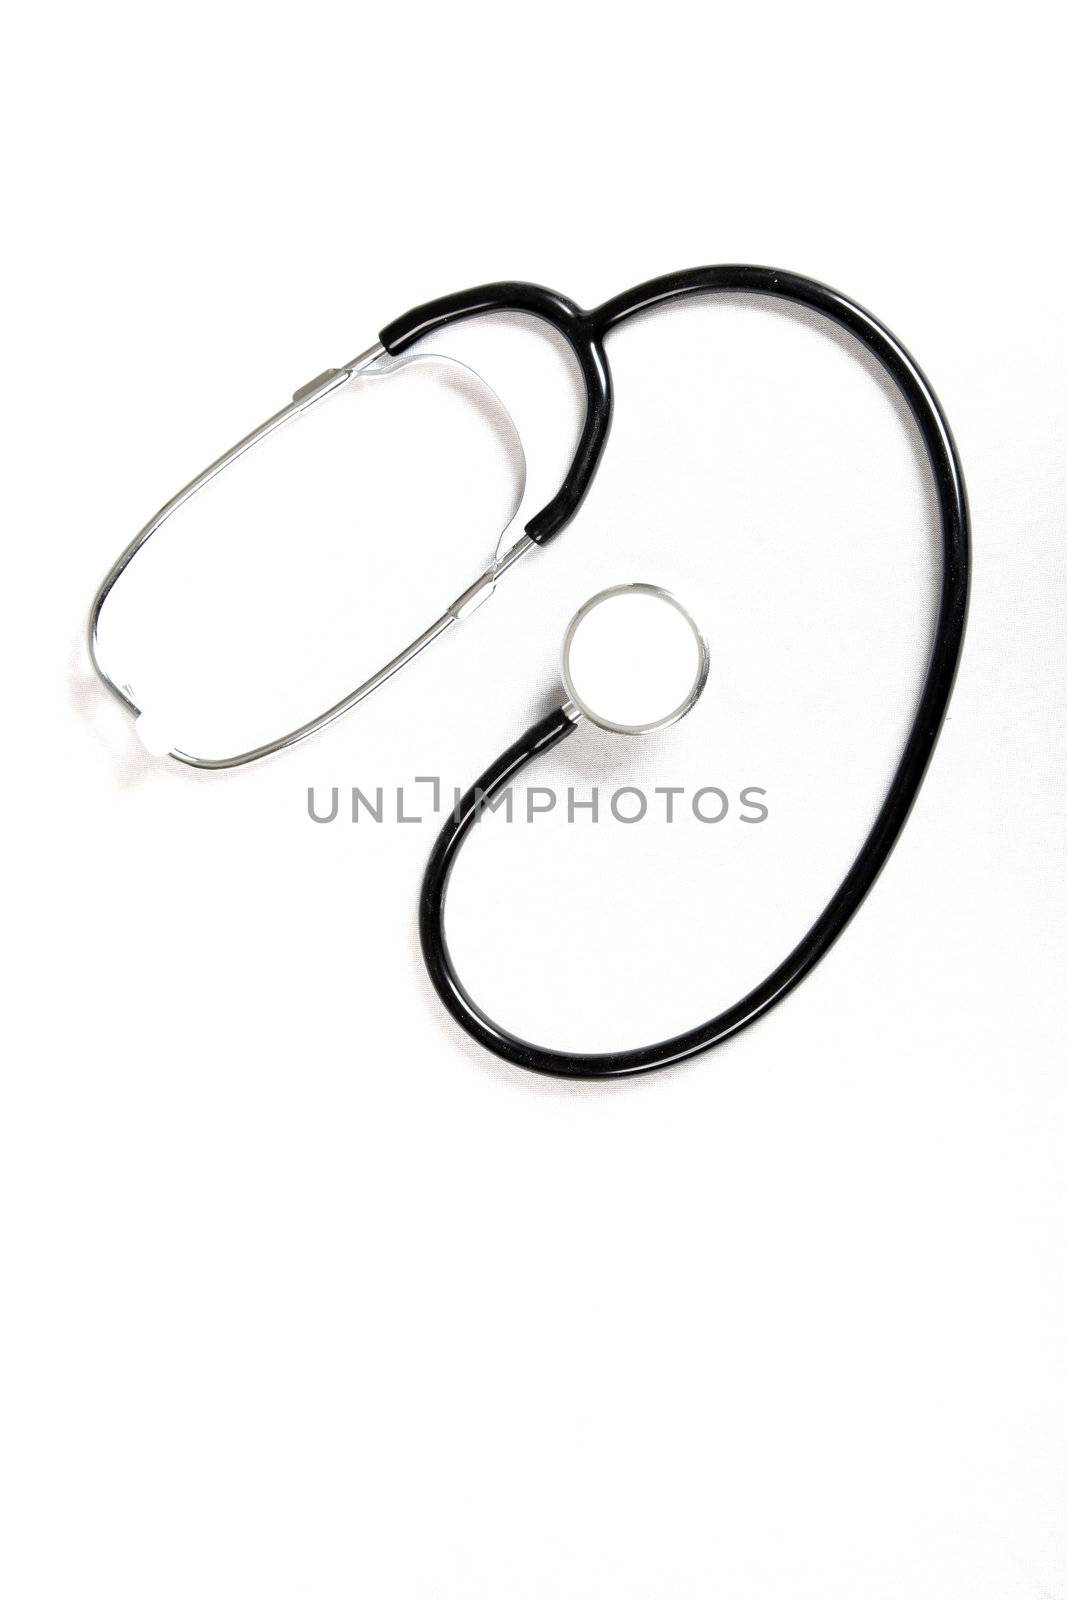 A stethoscope  by Farina6000